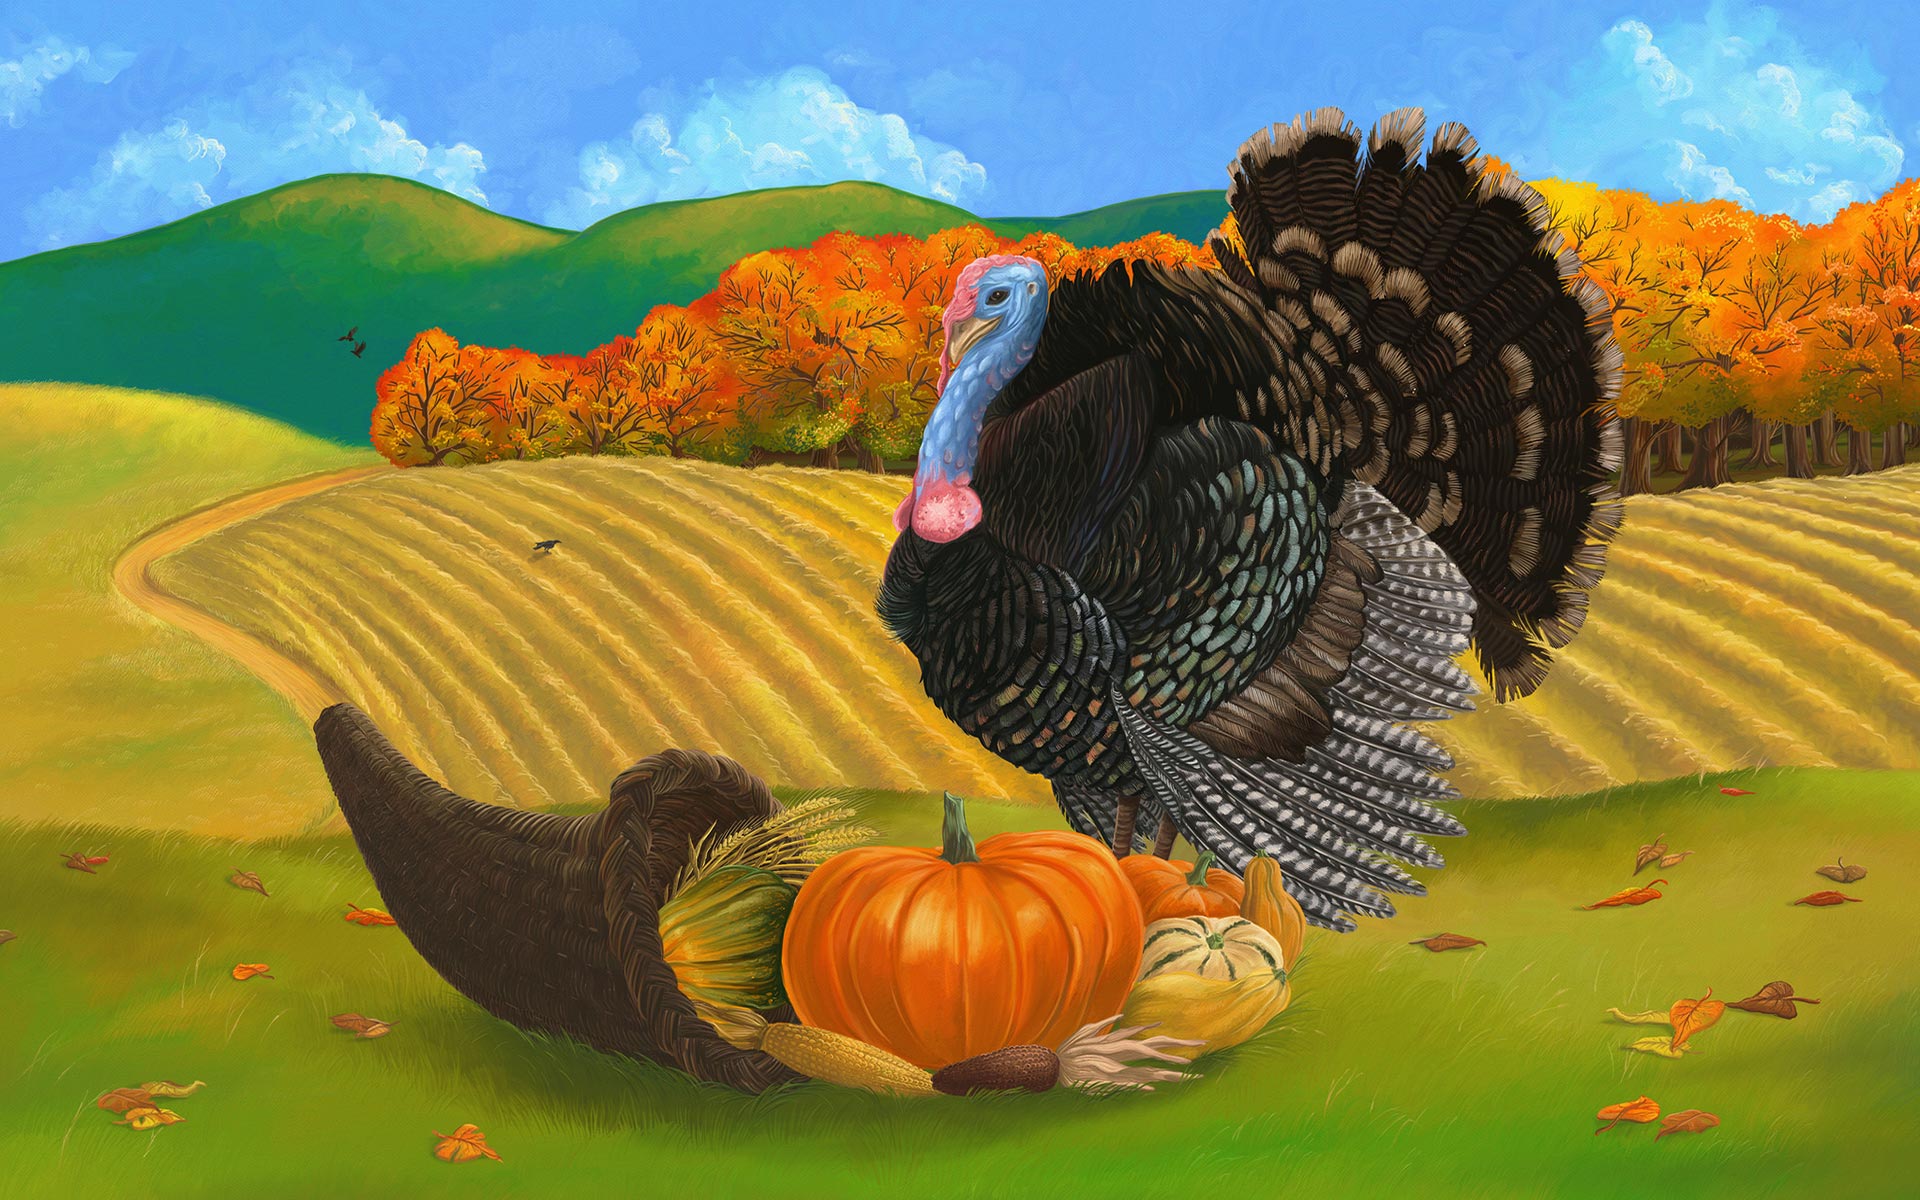 40 Free Thanksgiving Wallpaper and Background to try in 2016